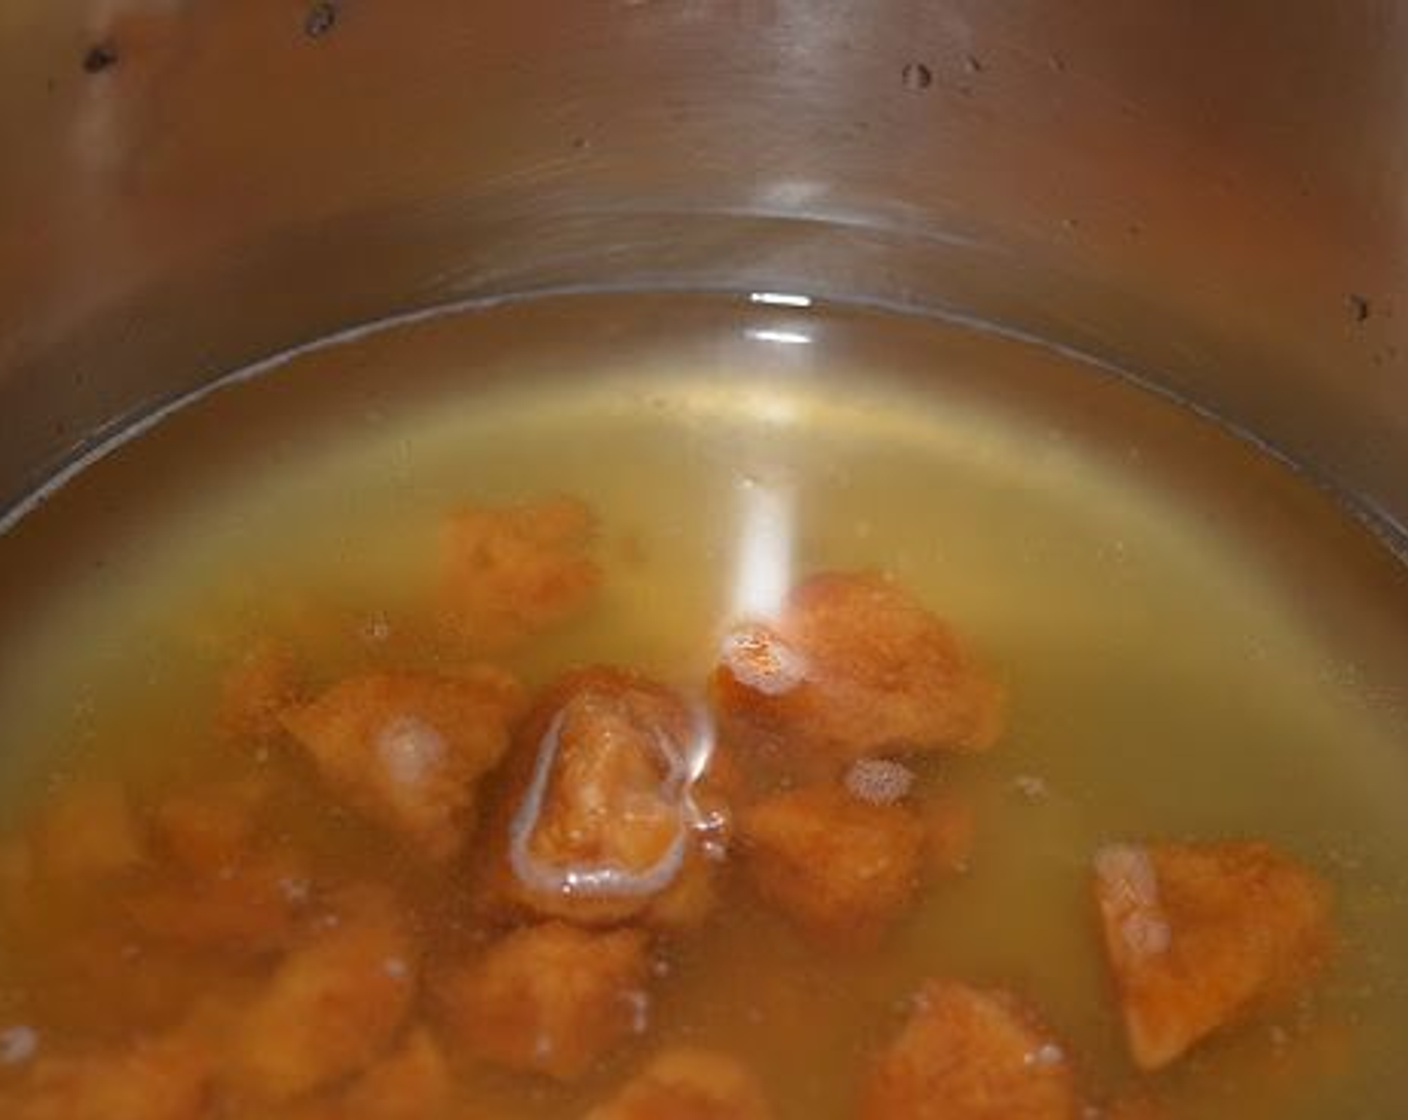 step 1 Take Jaggery (1/2 cup) in a saucepan and add some Water (1 cup) and bring it to a boil. Mix well so that the jaggery dissolves in the water.